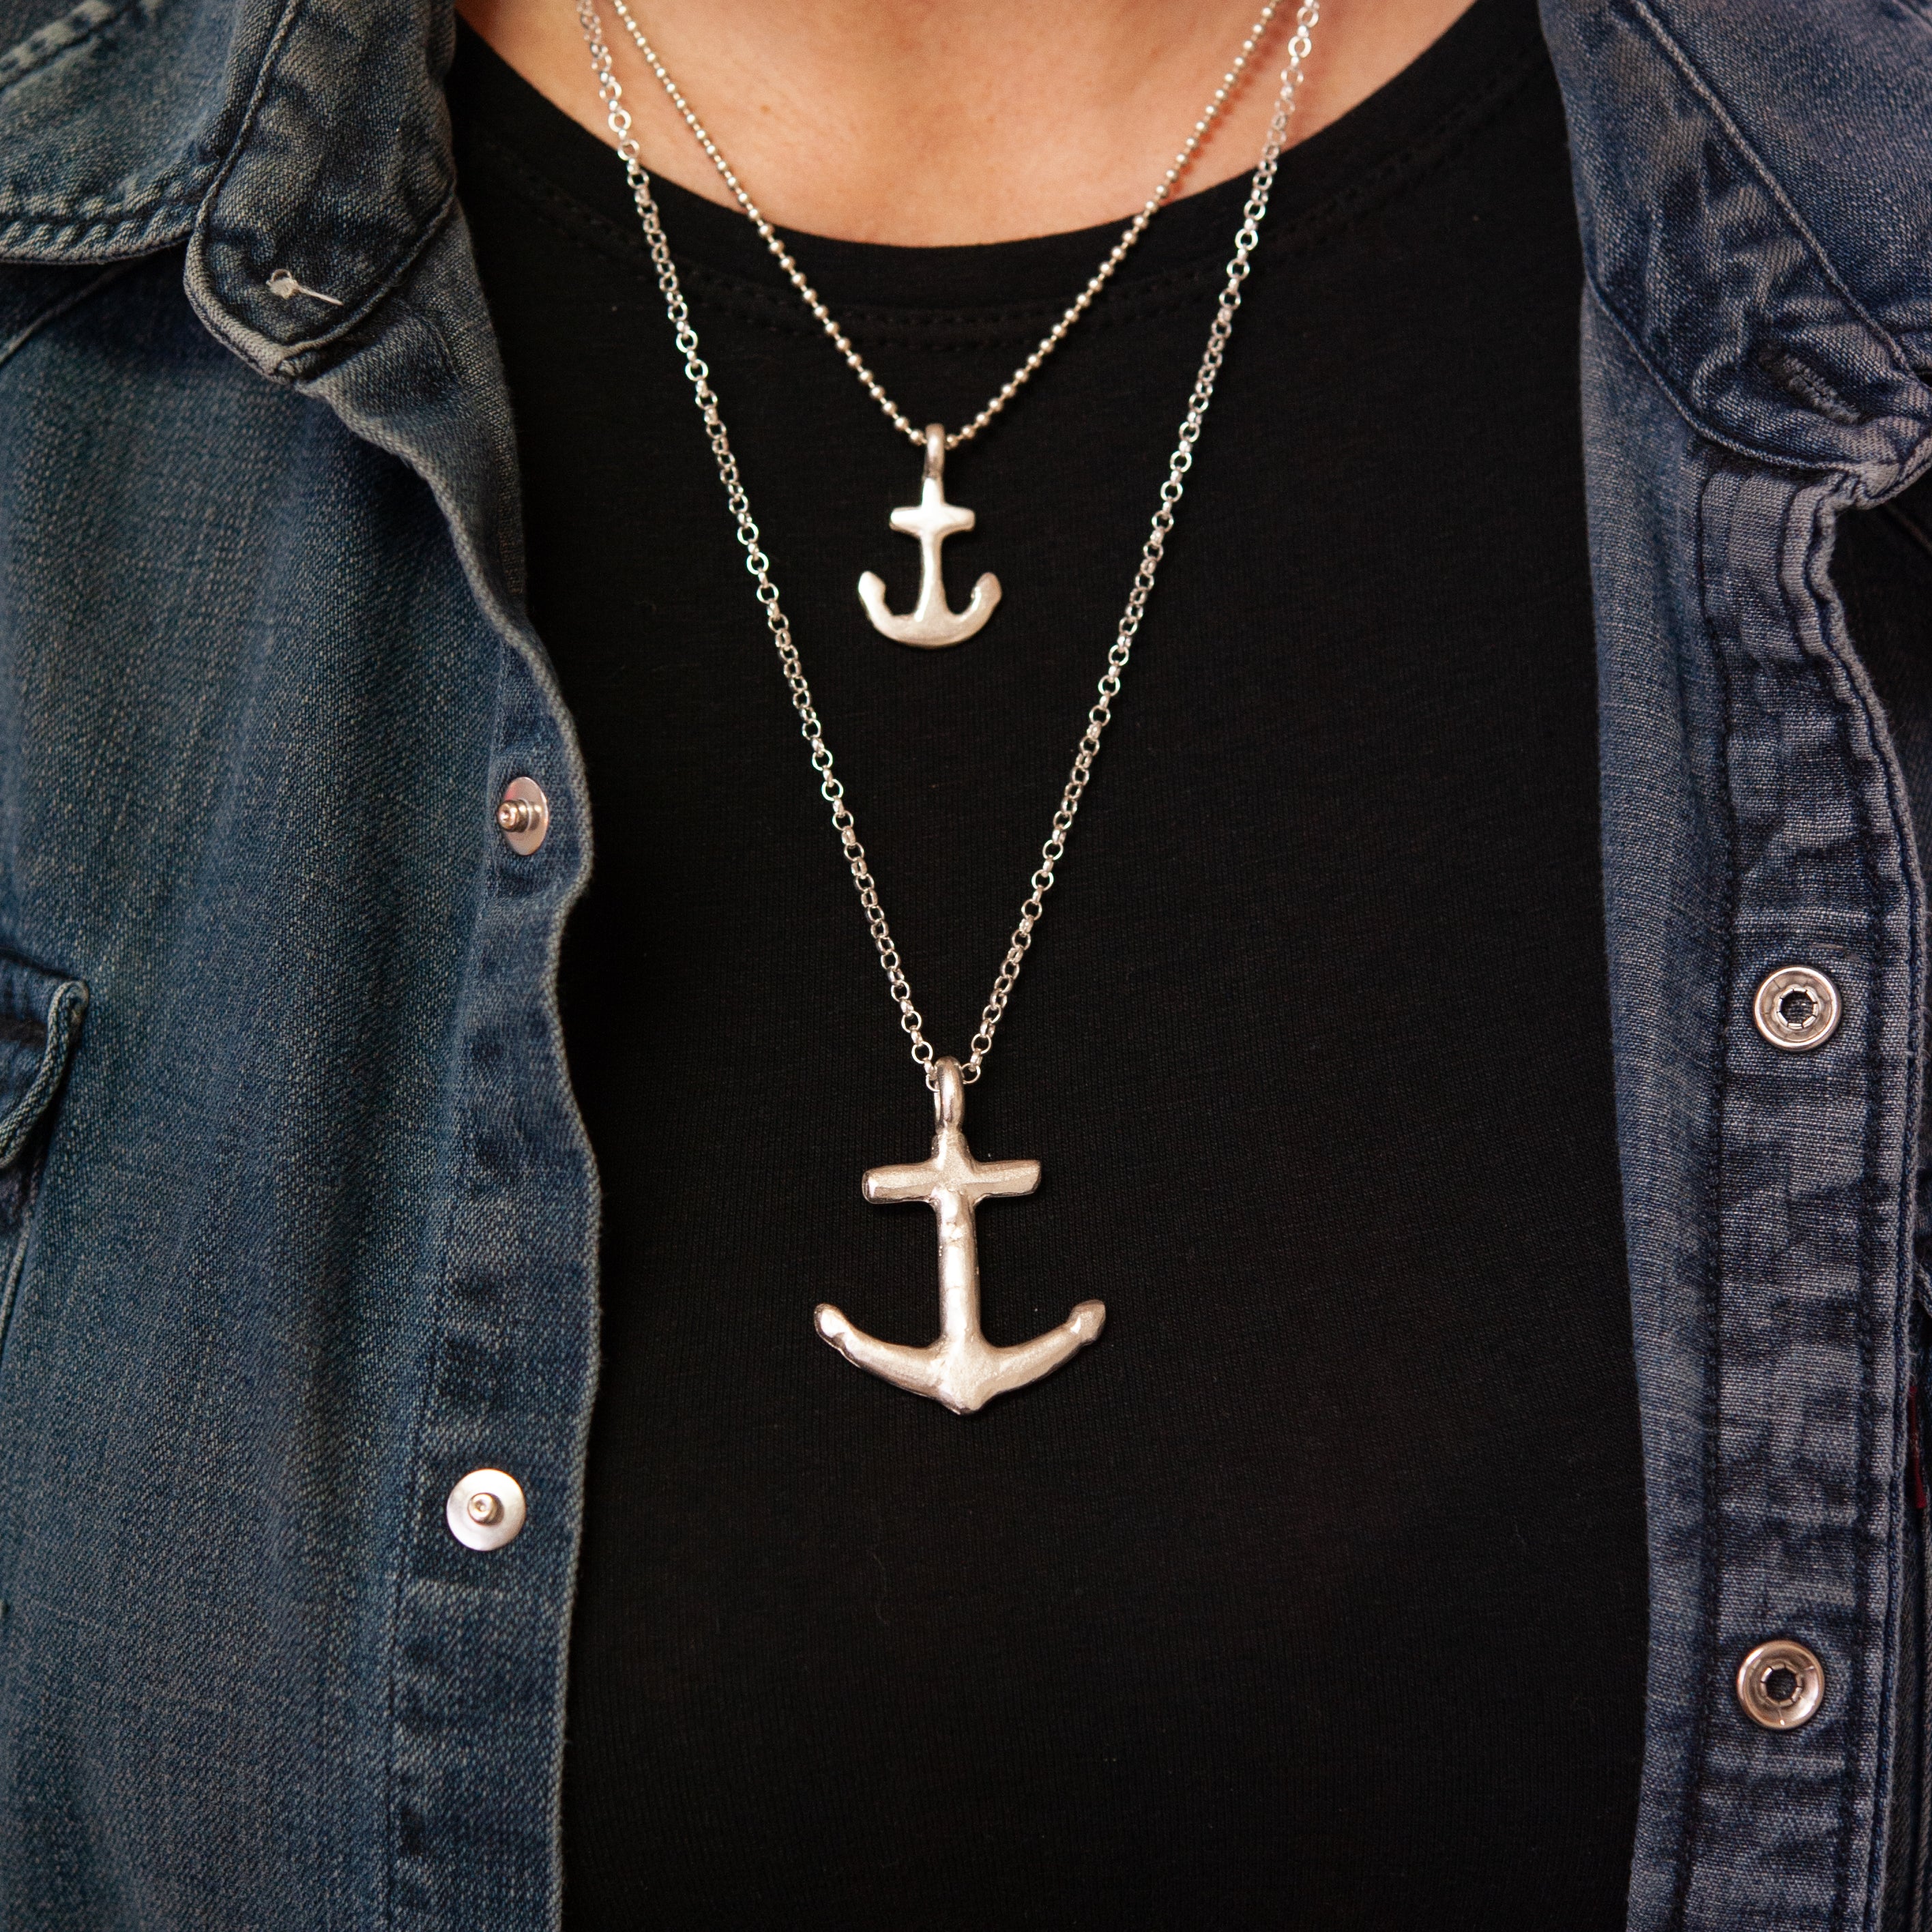 Belle & Bee large anchor necklace